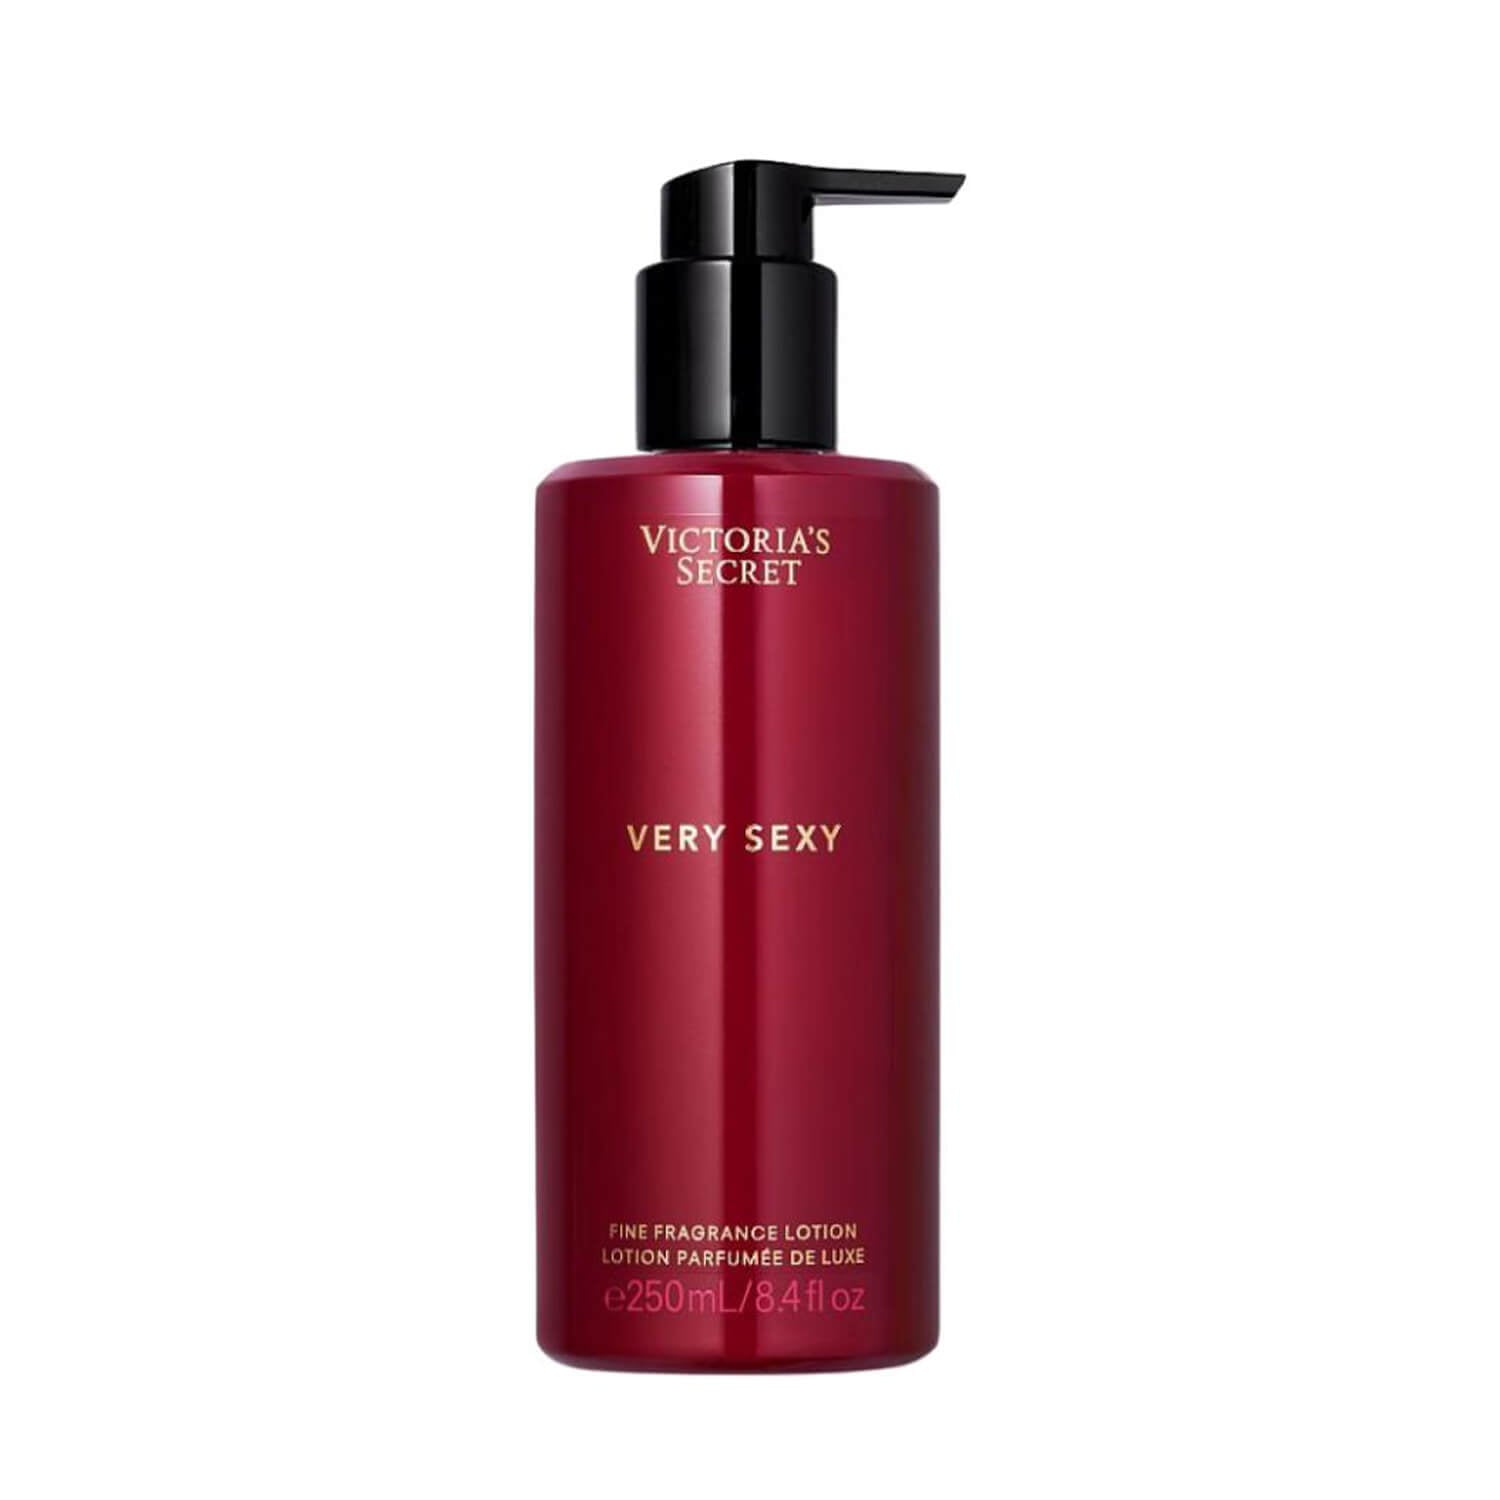 victoria secret fragrance lotion in very sexy available at heygirl.pk for cash on delivery in Karachi, Lahore, Islamabad, Rawalpindi across Pakistan. 